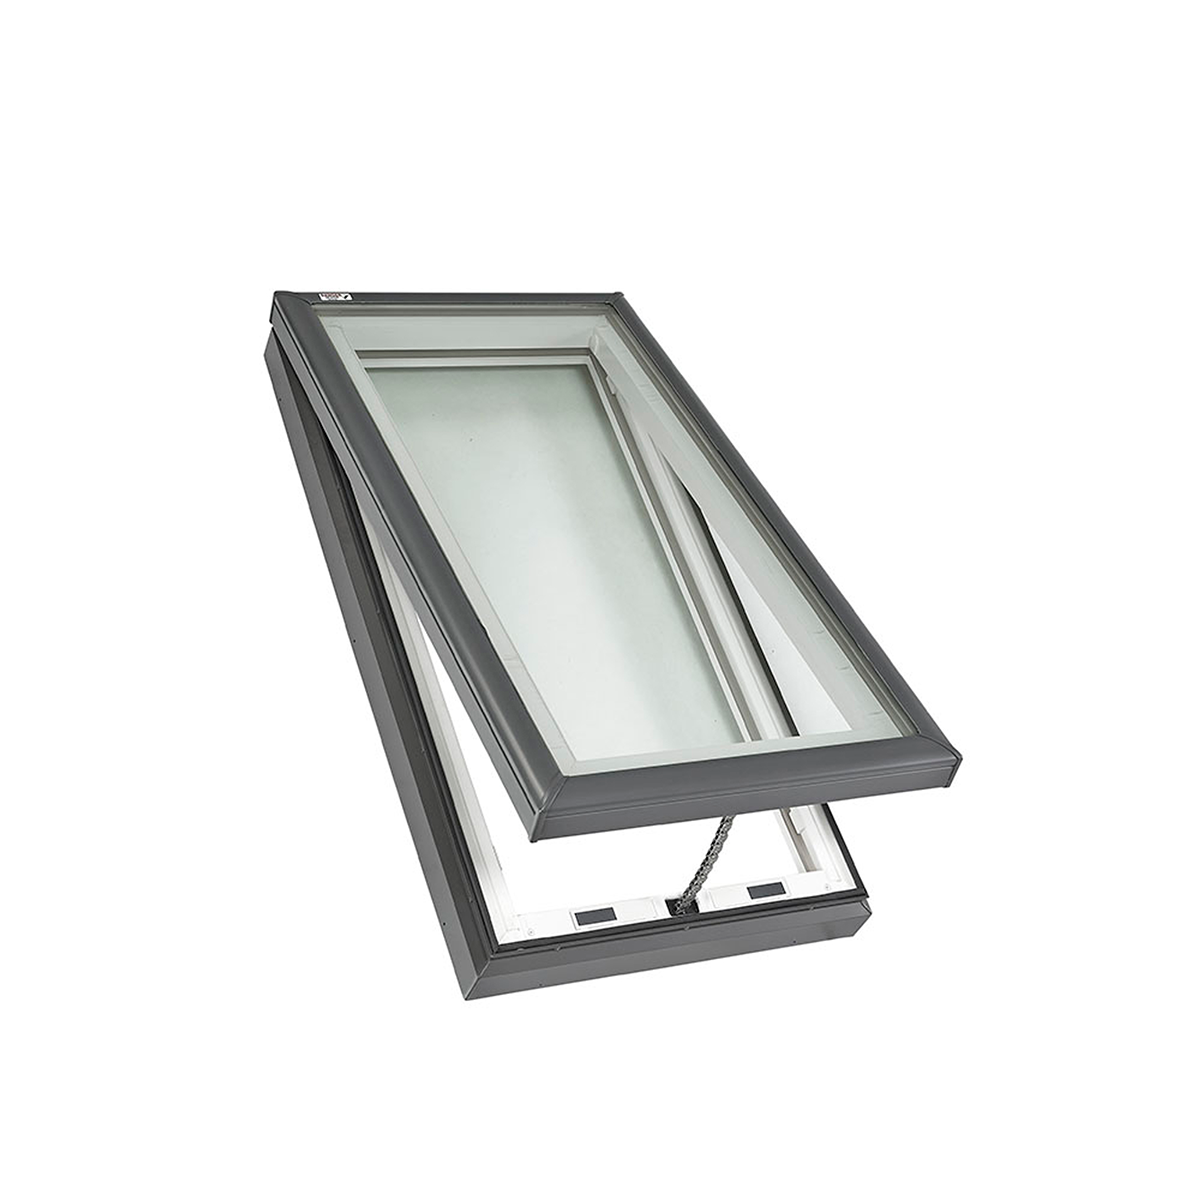 Manual Curb-Mount Skylight with Laminated Low-E3 Glass - 22-1/2 in. x 34-1/2 in. - VCM 2234